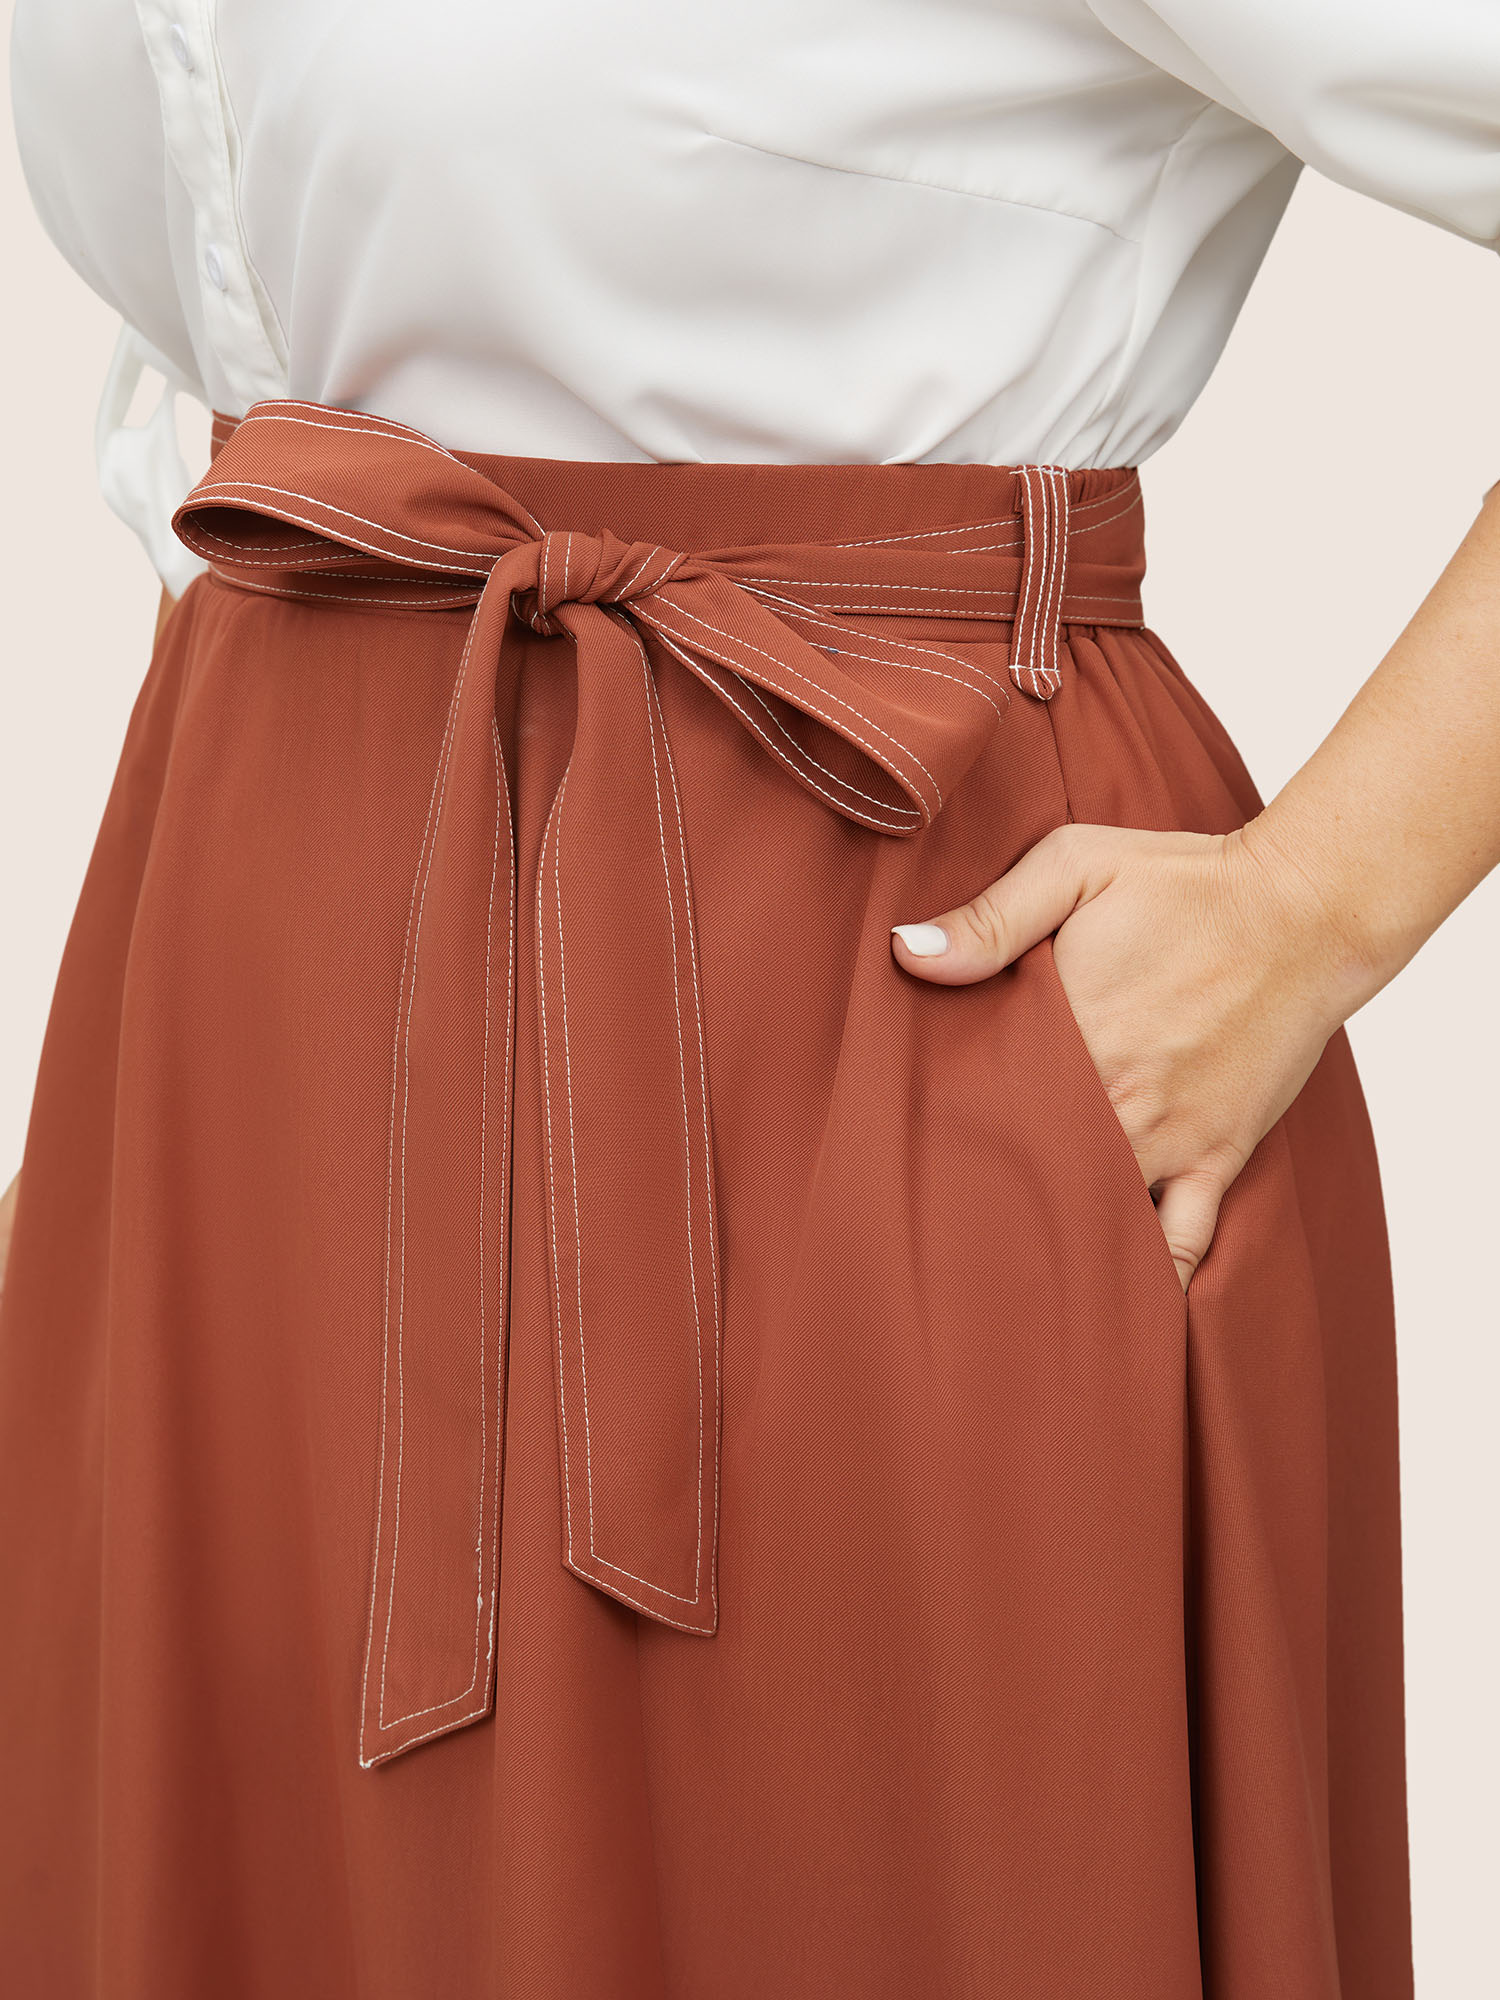 

Plus Size Contrast Trim Bowknot Belted Asymmetrical Hem Skirt Women Maroon At the Office Non No stretch Slanted pocket Belt Work Skirts BloomChic